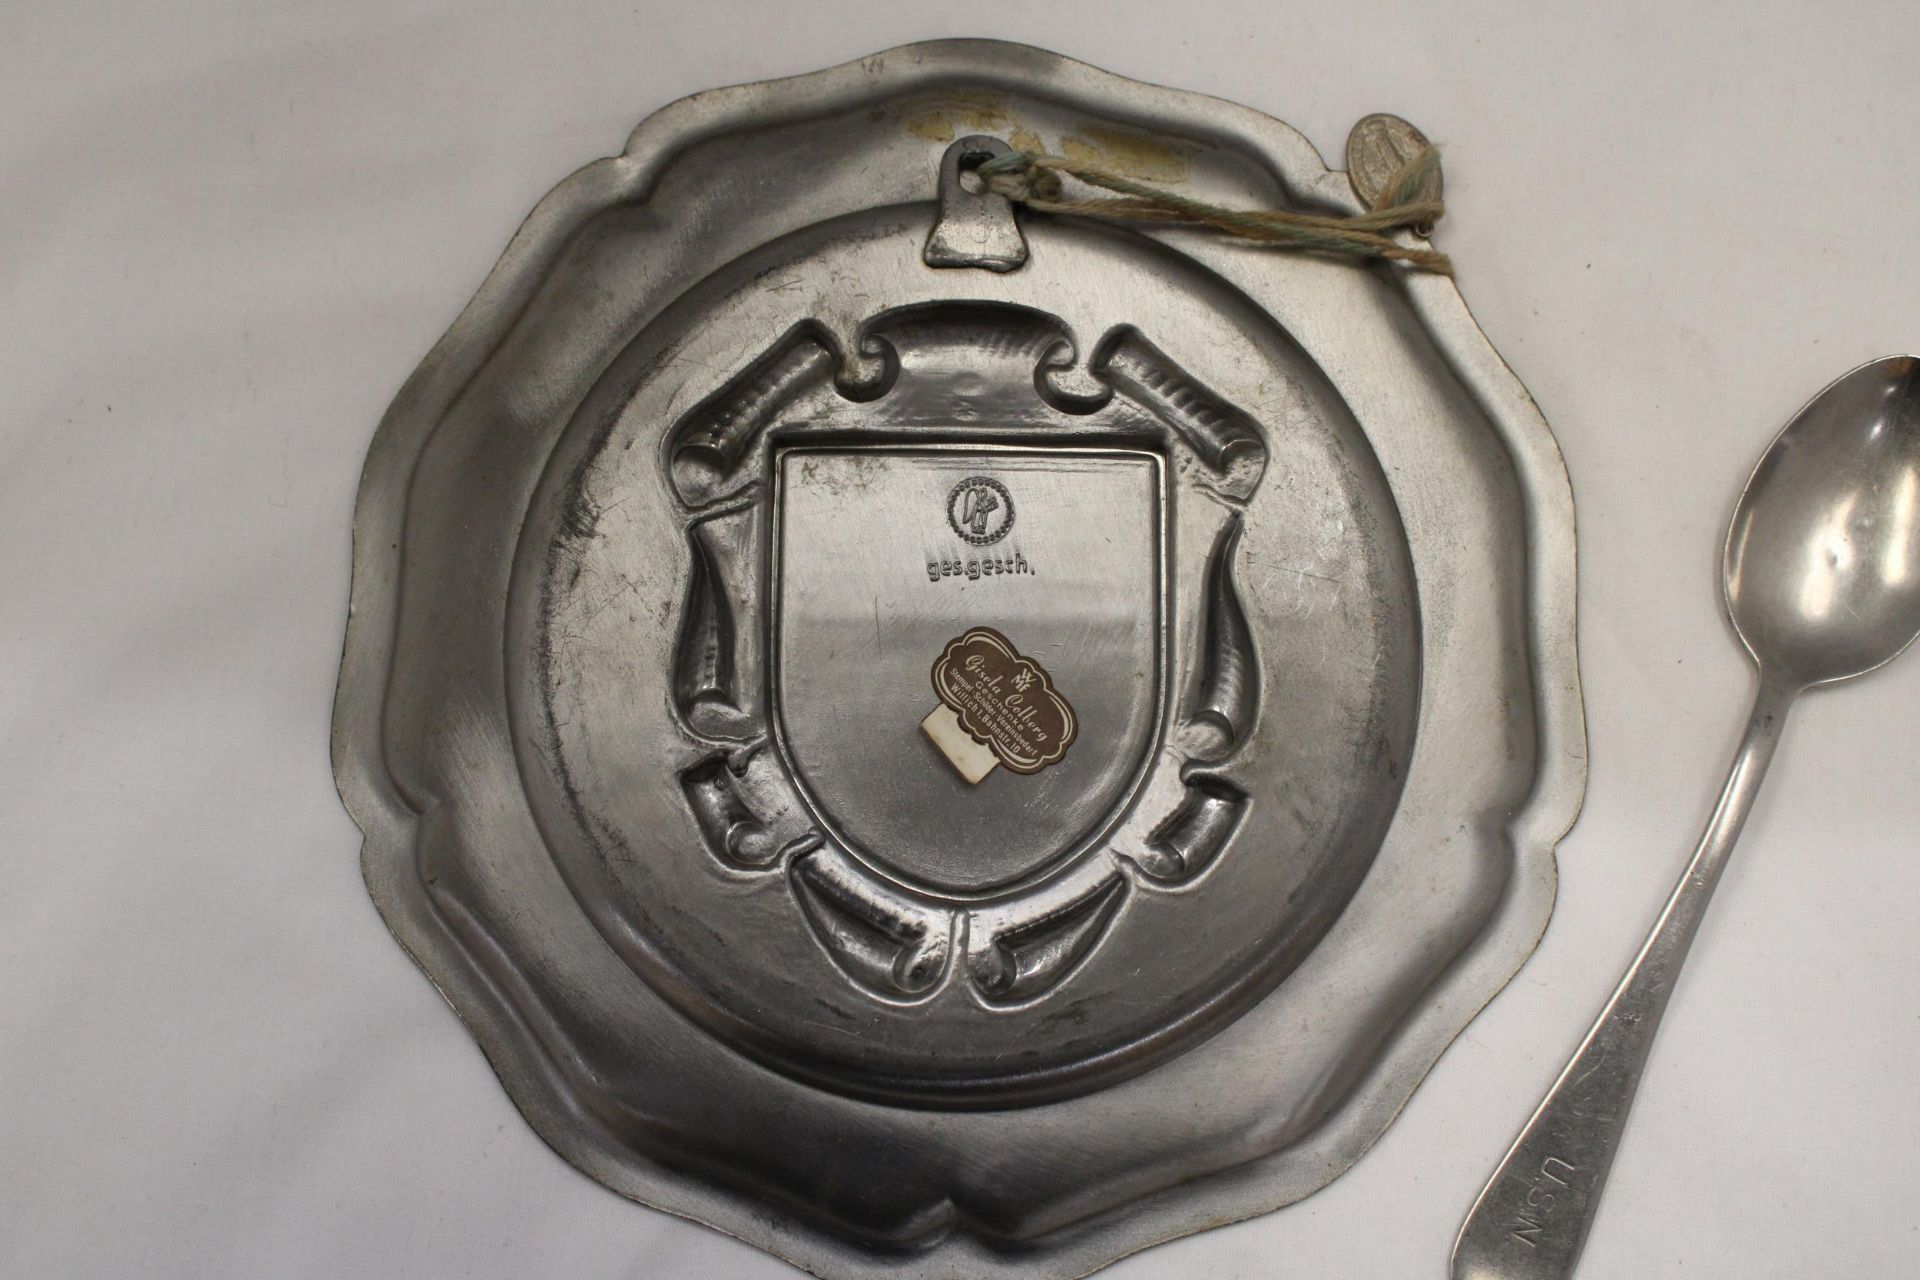 A VINTAGE PEWTER TRAY AND A UNITED STATES NAVY SPOON - Image 6 of 7